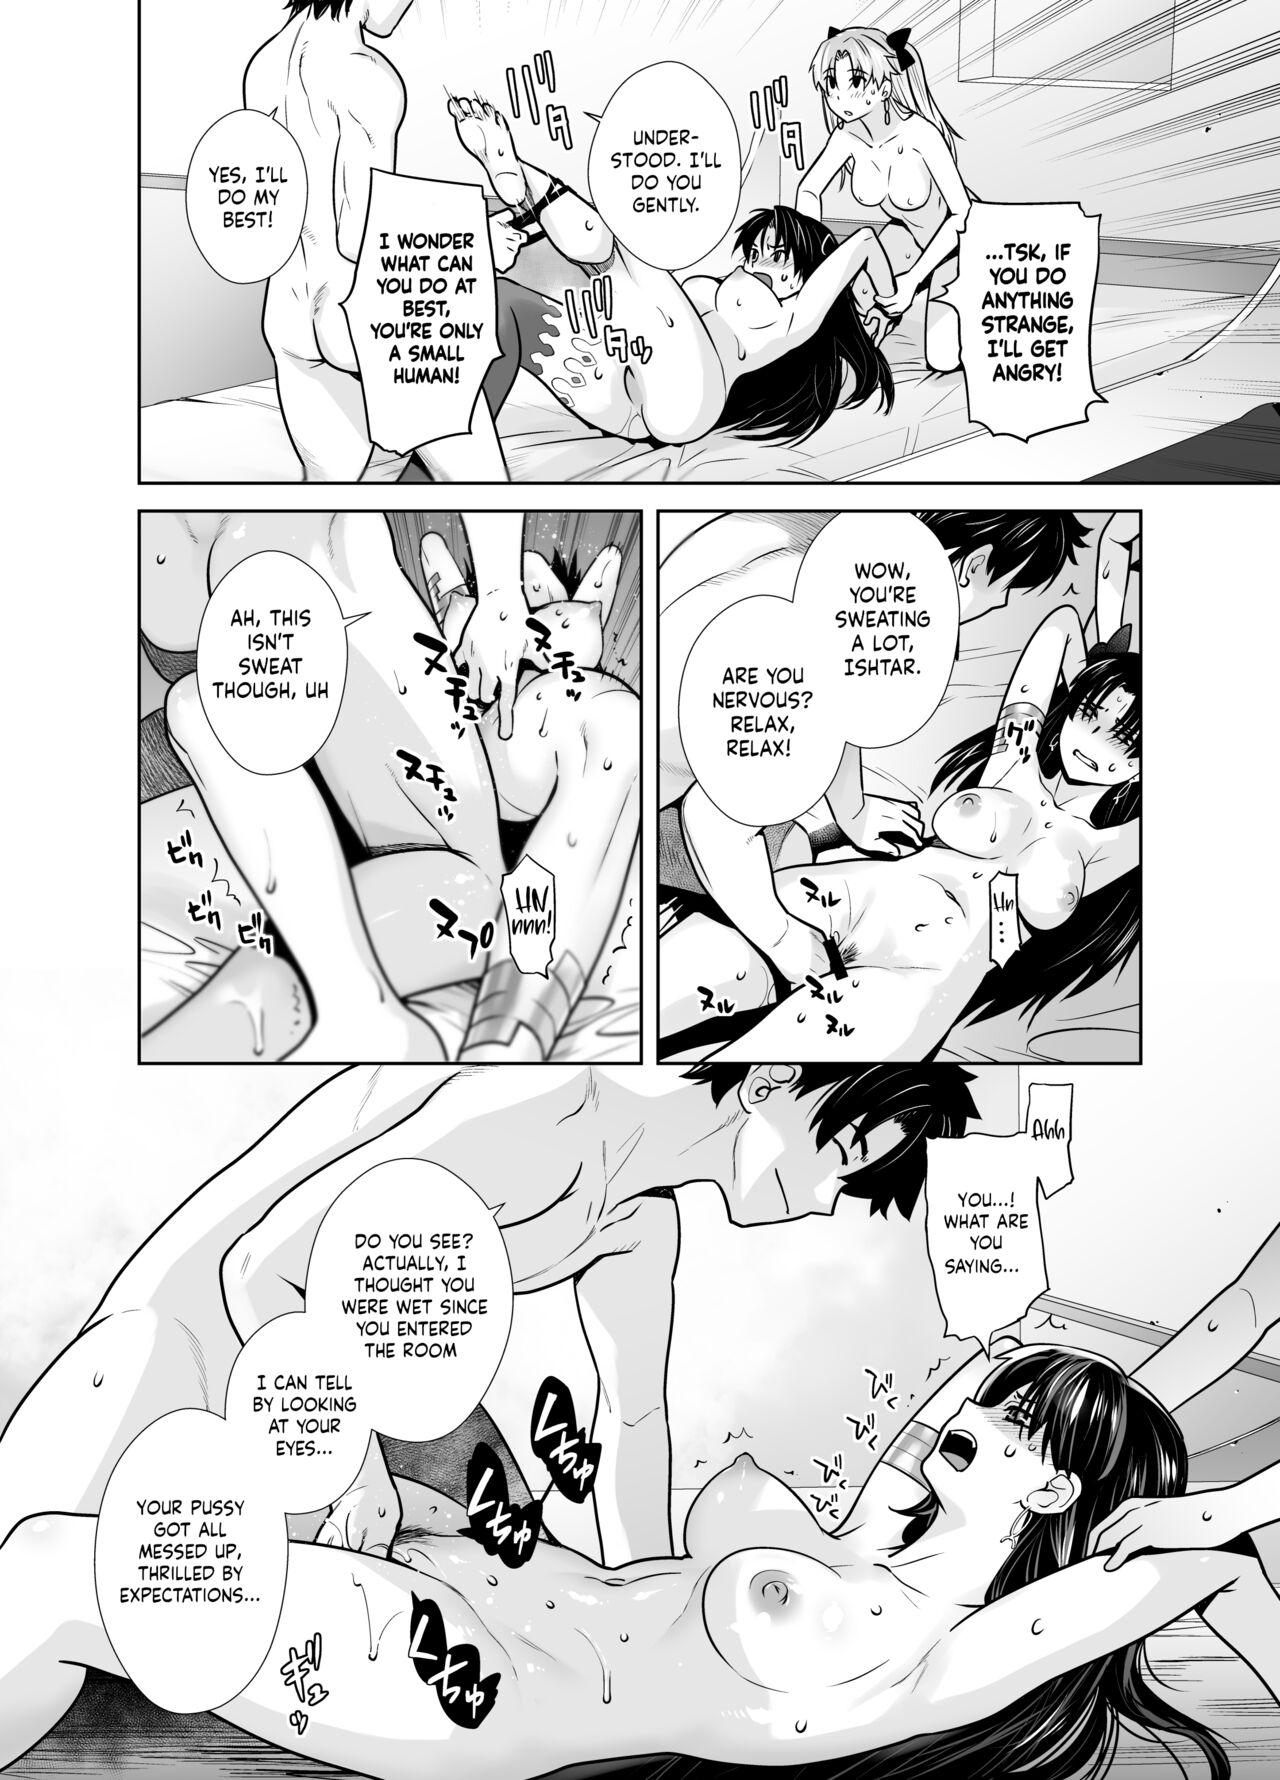 Asian HEAVEN'S DRIVE 10 - Fate grand order Mujer - Page 12